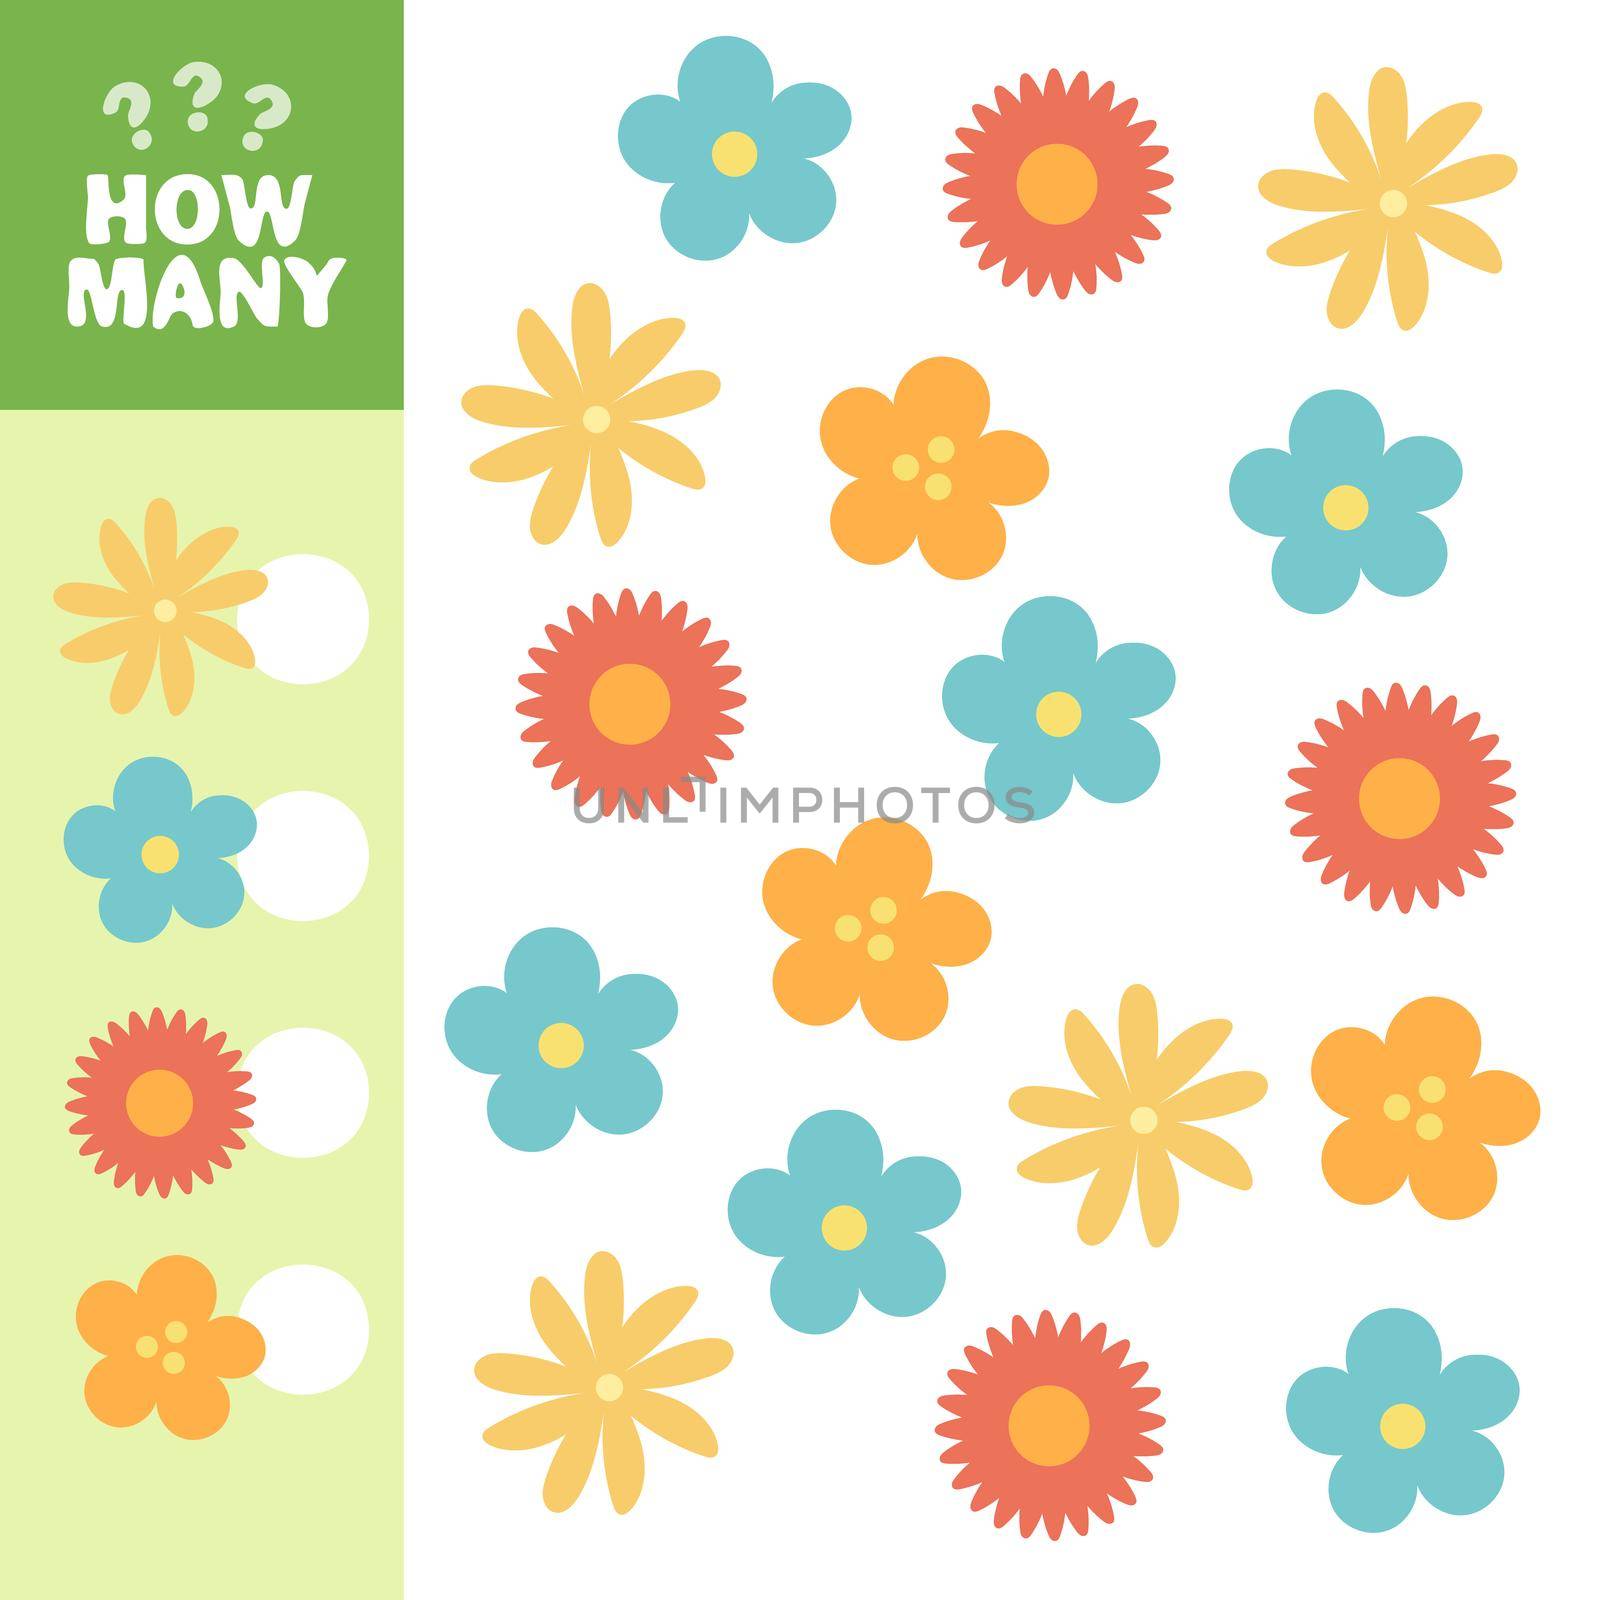 How many counting game for preschool children. Count how many flowers by natali_brill